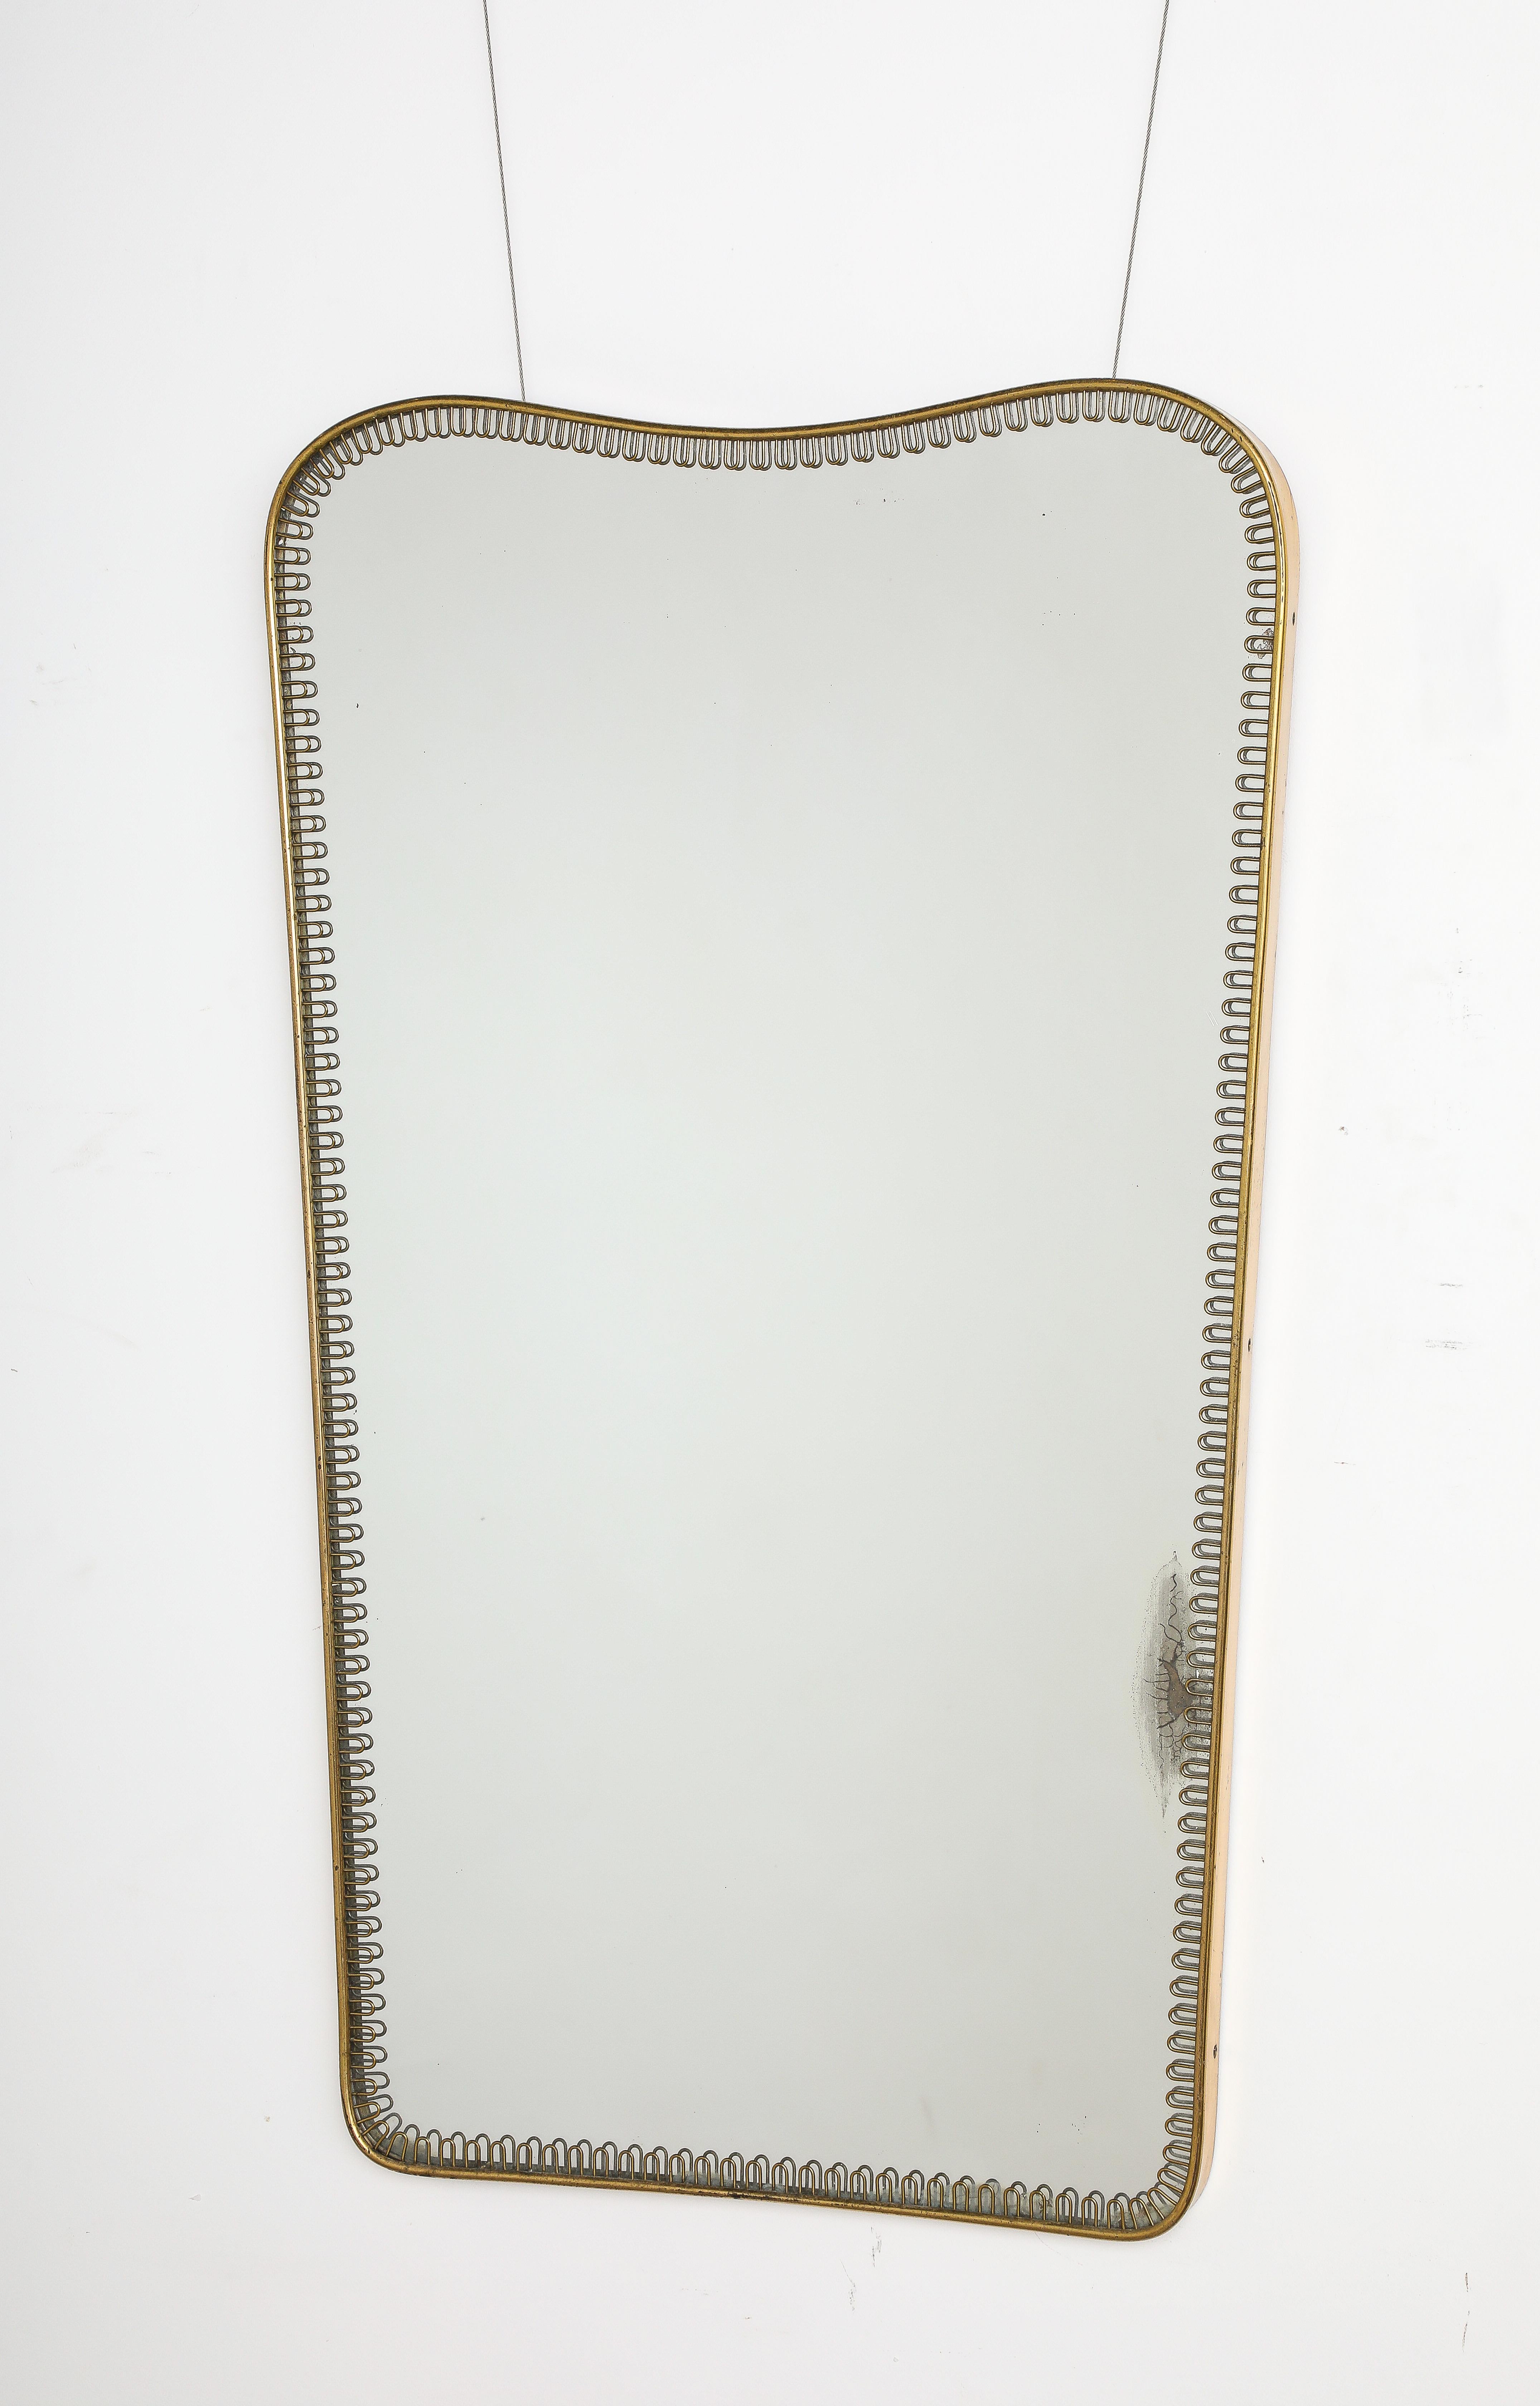 A rare and elegant brass framed mirror attribute to designer Gio Ponti, the crest is shaped and tapers downward to a straight side and base.  The whole mirror plate is surrounded with brass scroll motif bordering the outer brass molding.  The brass